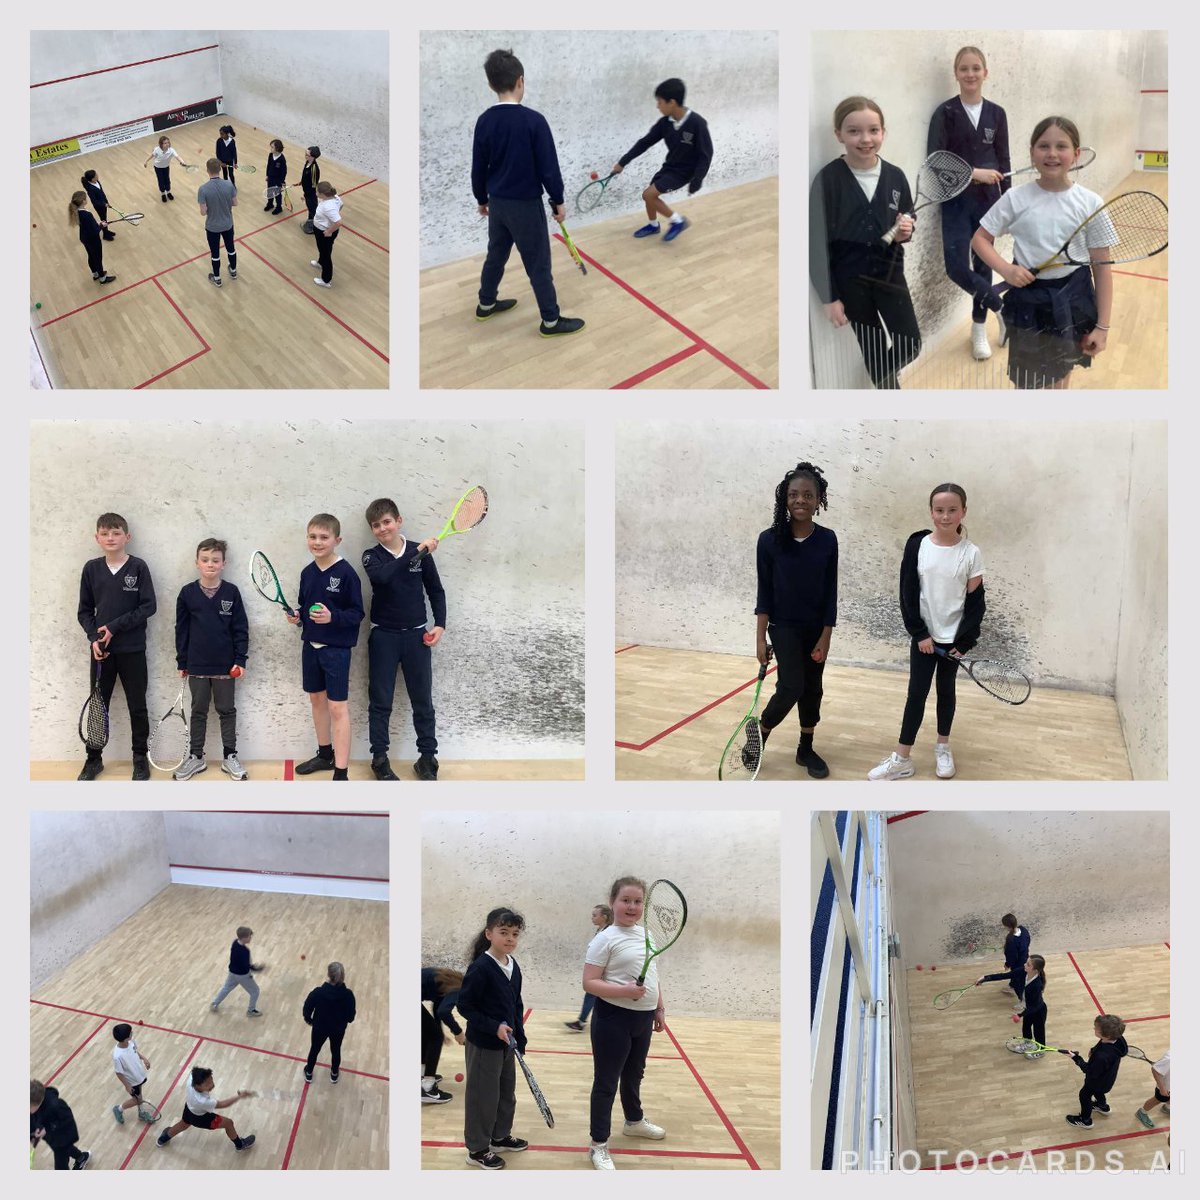 5C had a great morning in our final squash session at the S&B squash courts this morning! @Olol_sport @ololprimary_HT #MakeADifference